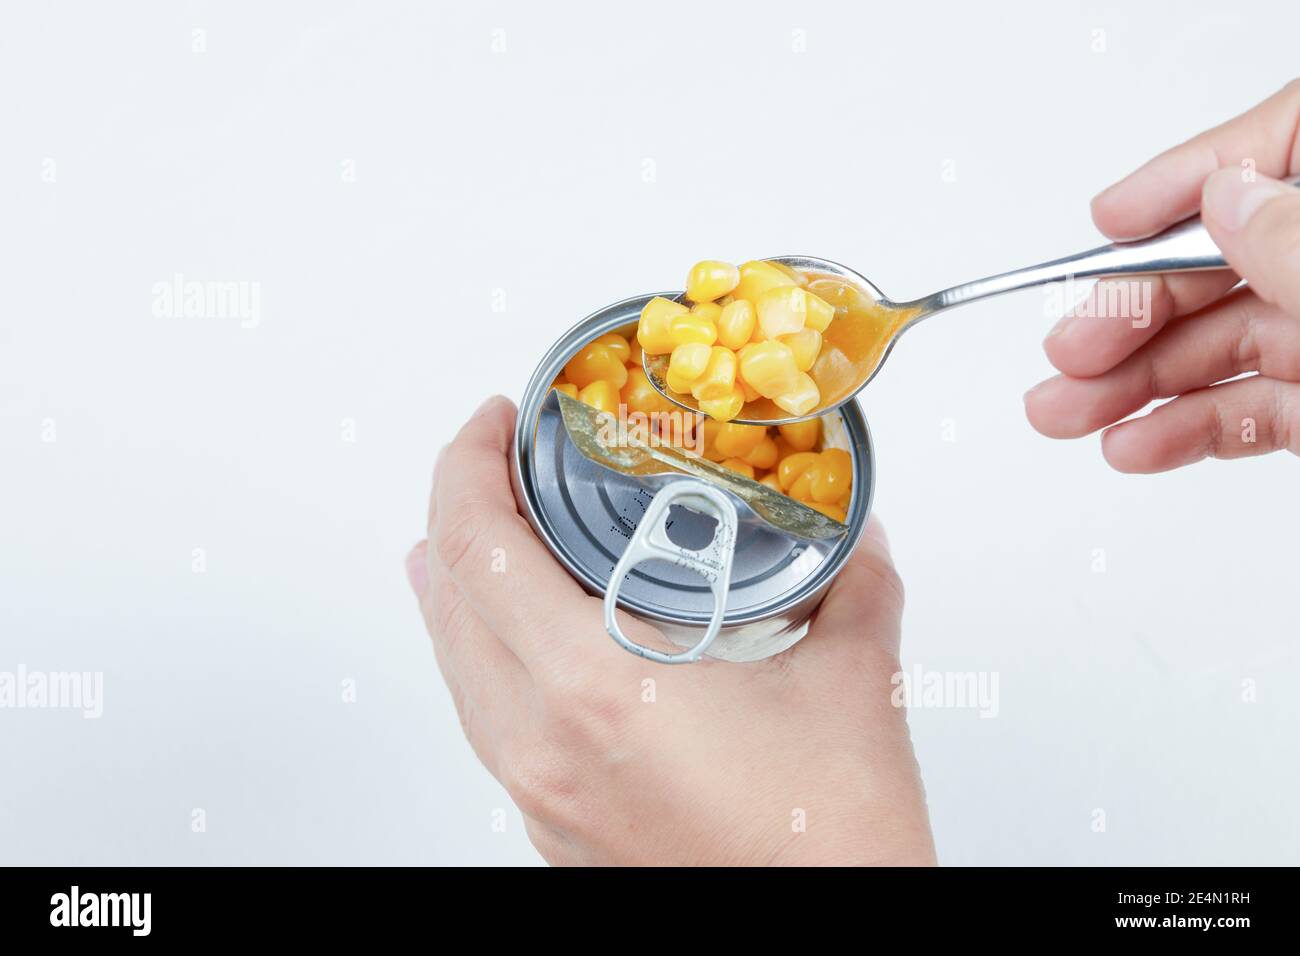 Hand taking a spoon of boiled sweet corn from a tin can on a white background Stock Photo